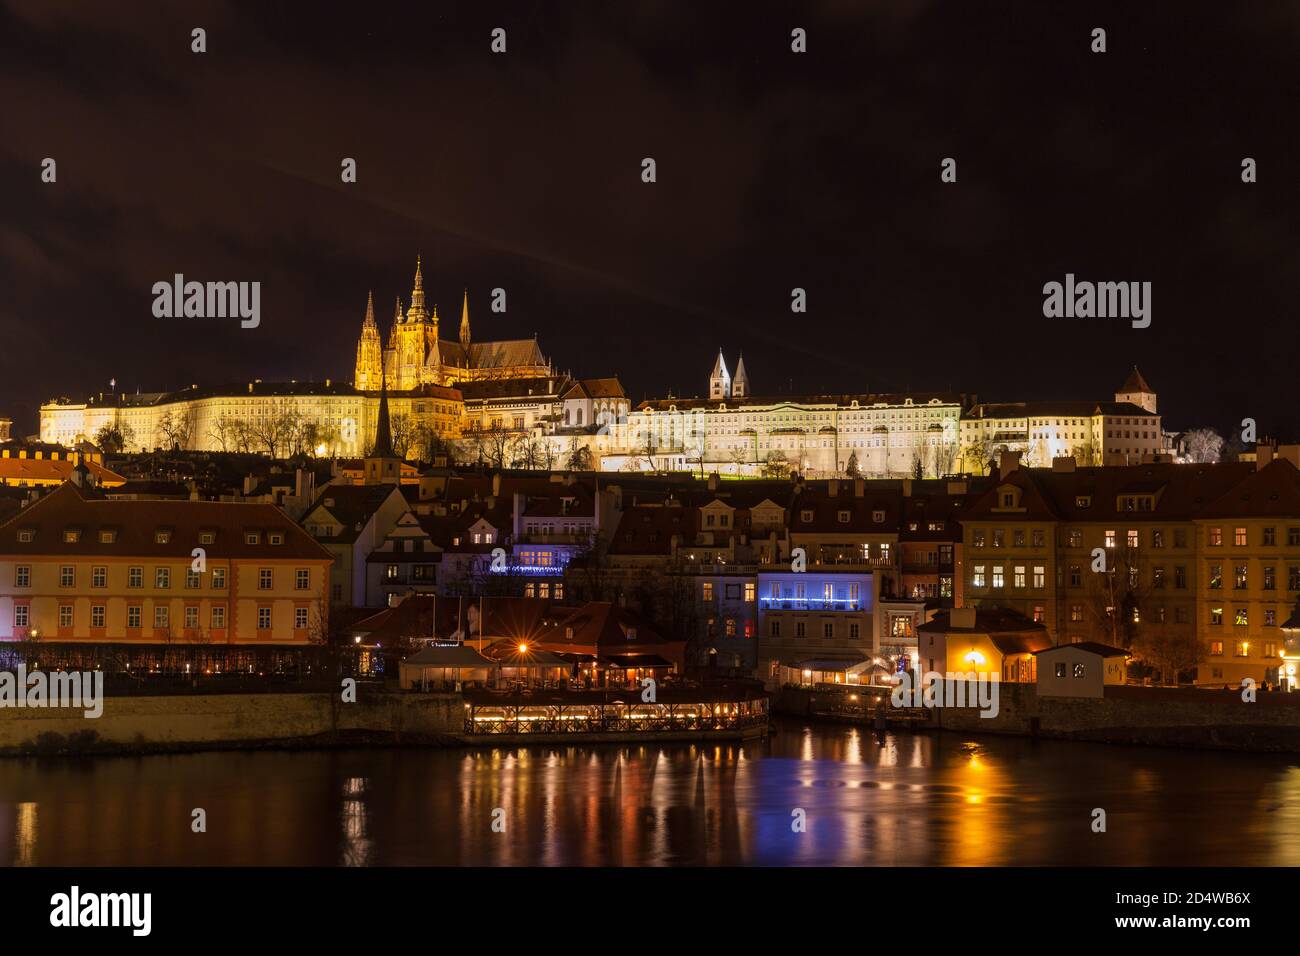 Beautiful night view of the light illuminated Prague Castle and St. Vitus Cathedral in Mala Strana old town by Vltava River from Charles Bridge, Pragu Stock Photo